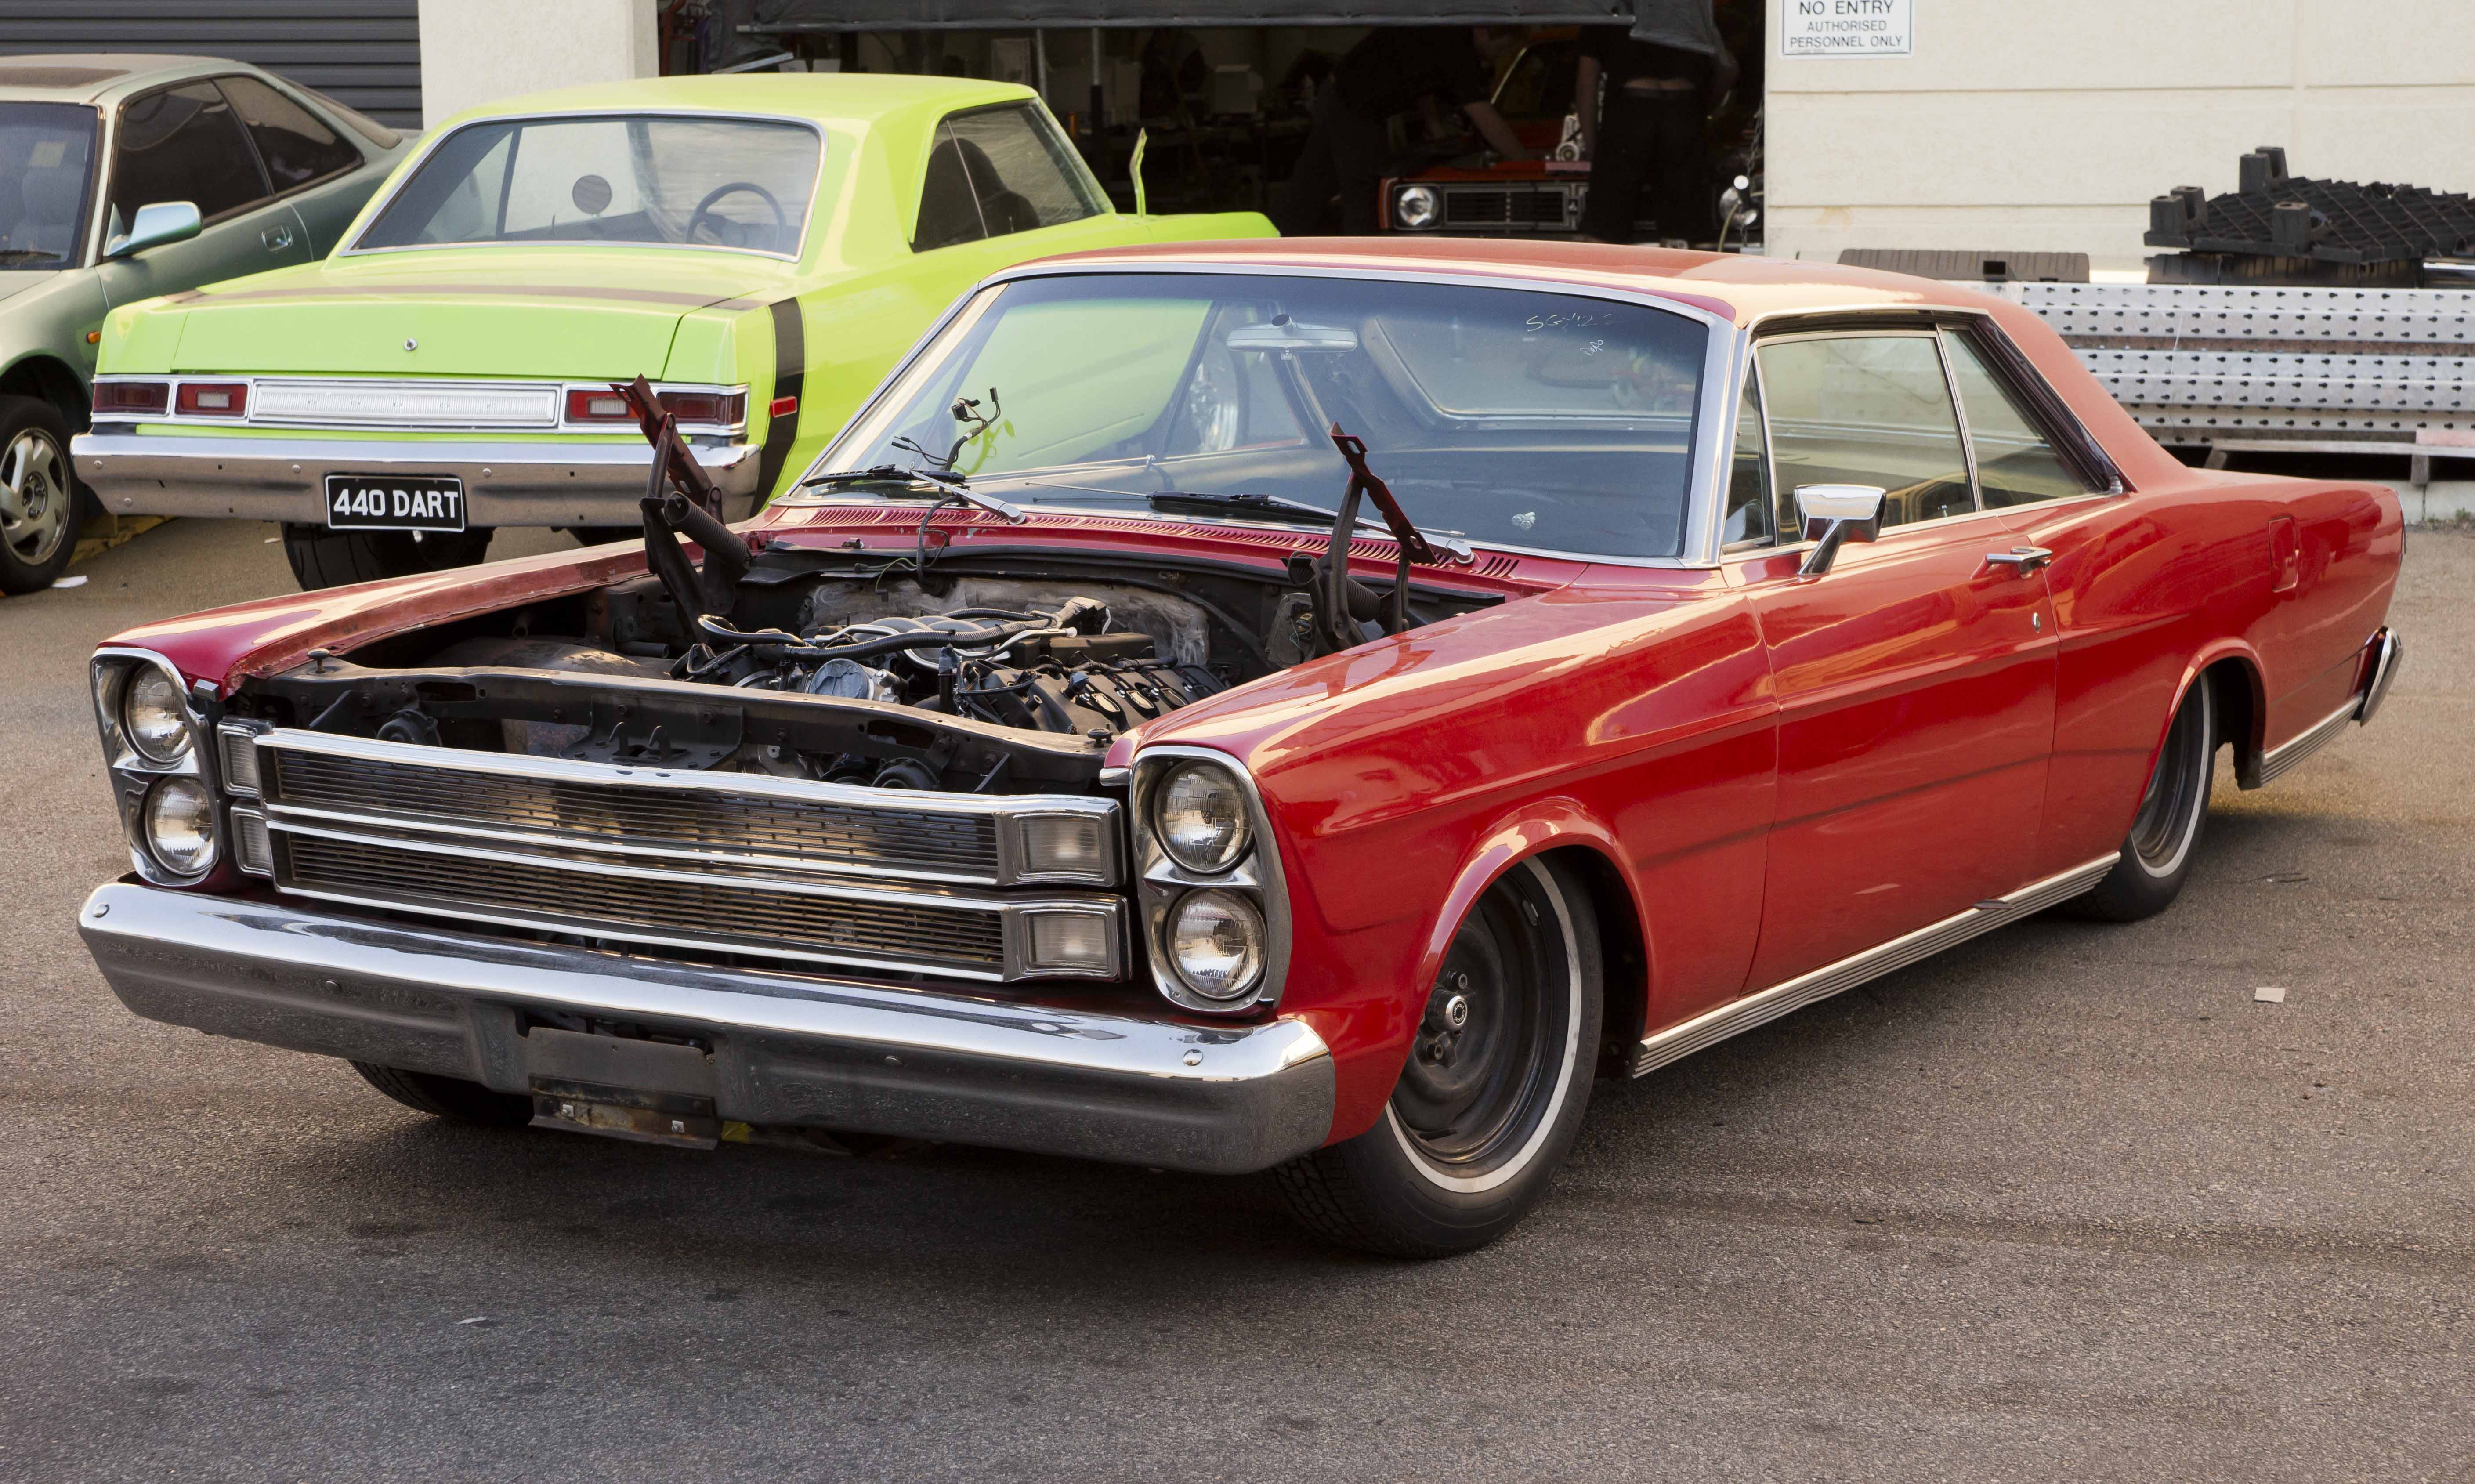 IN THE BUILD – 1966 Ford Galaxie